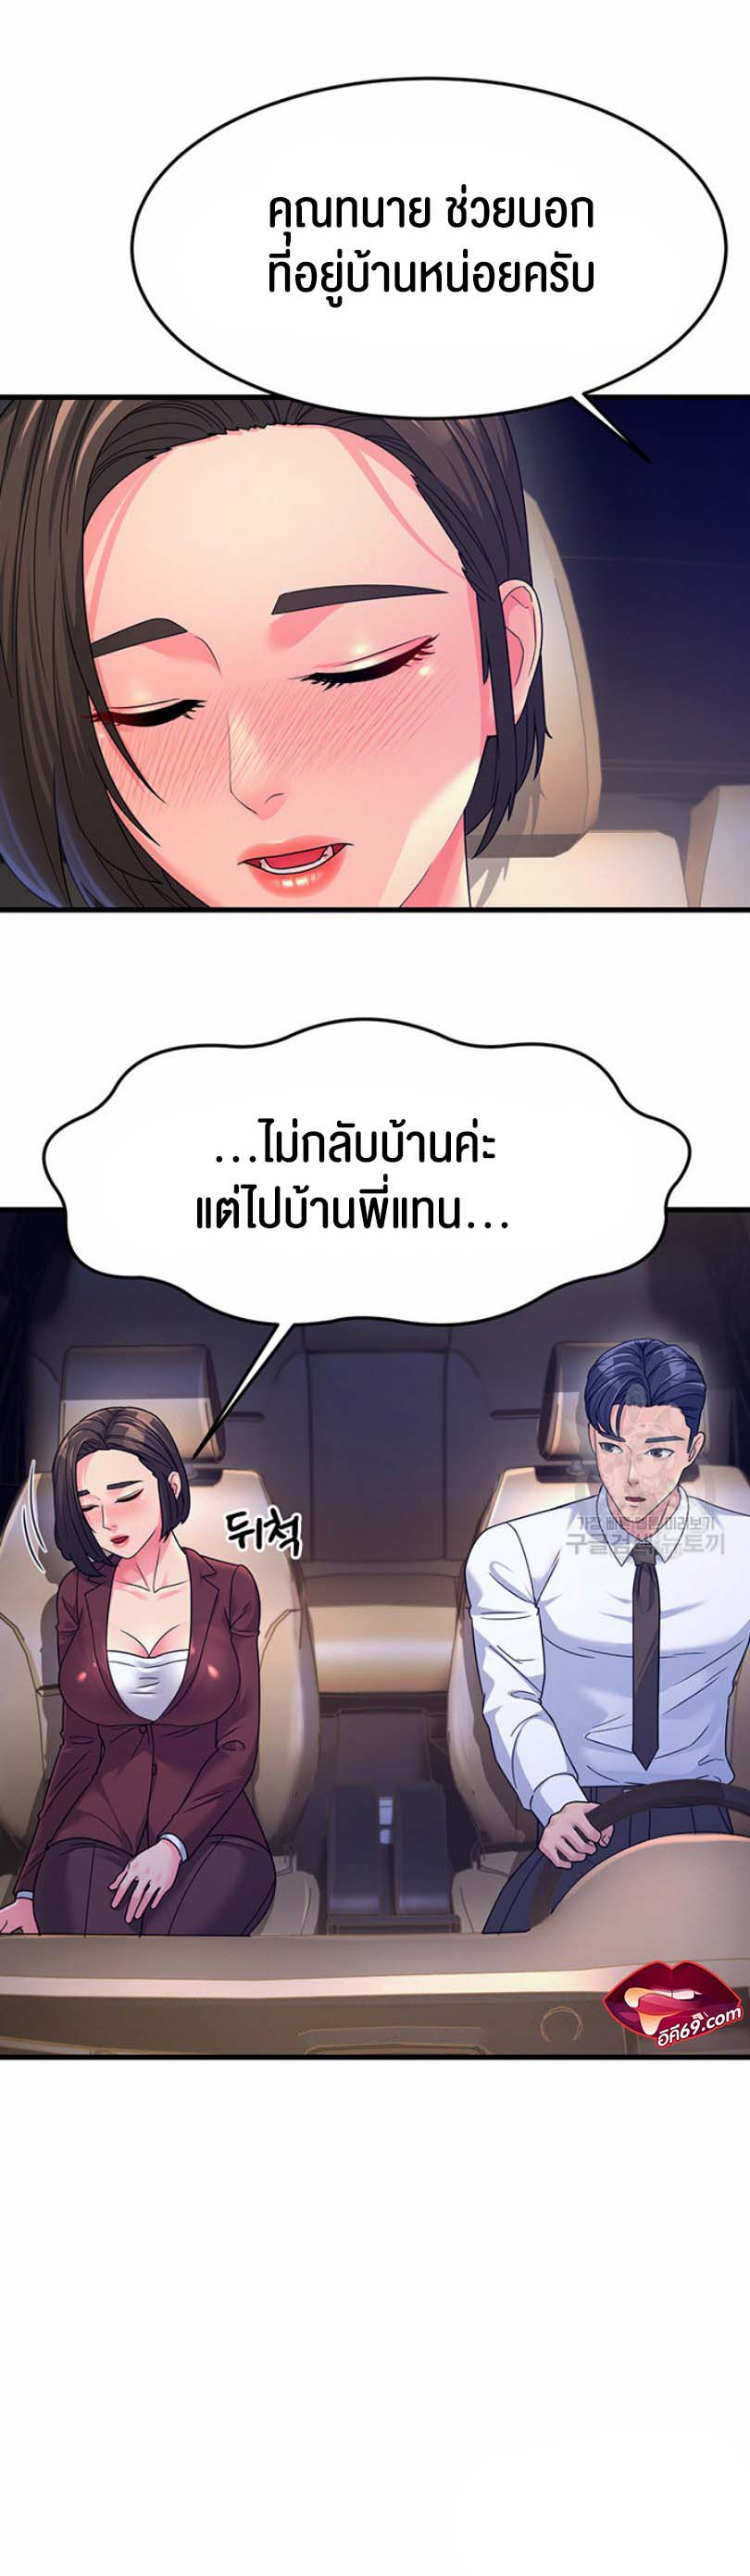 à¸­à¹ˆà¸²à¸™à¹‚à¸”à¸ˆà¸´à¸™ à¹€à¸£à¸·à¹ˆà¸­à¸‡ Mother in Law Bends To My Will 9 24